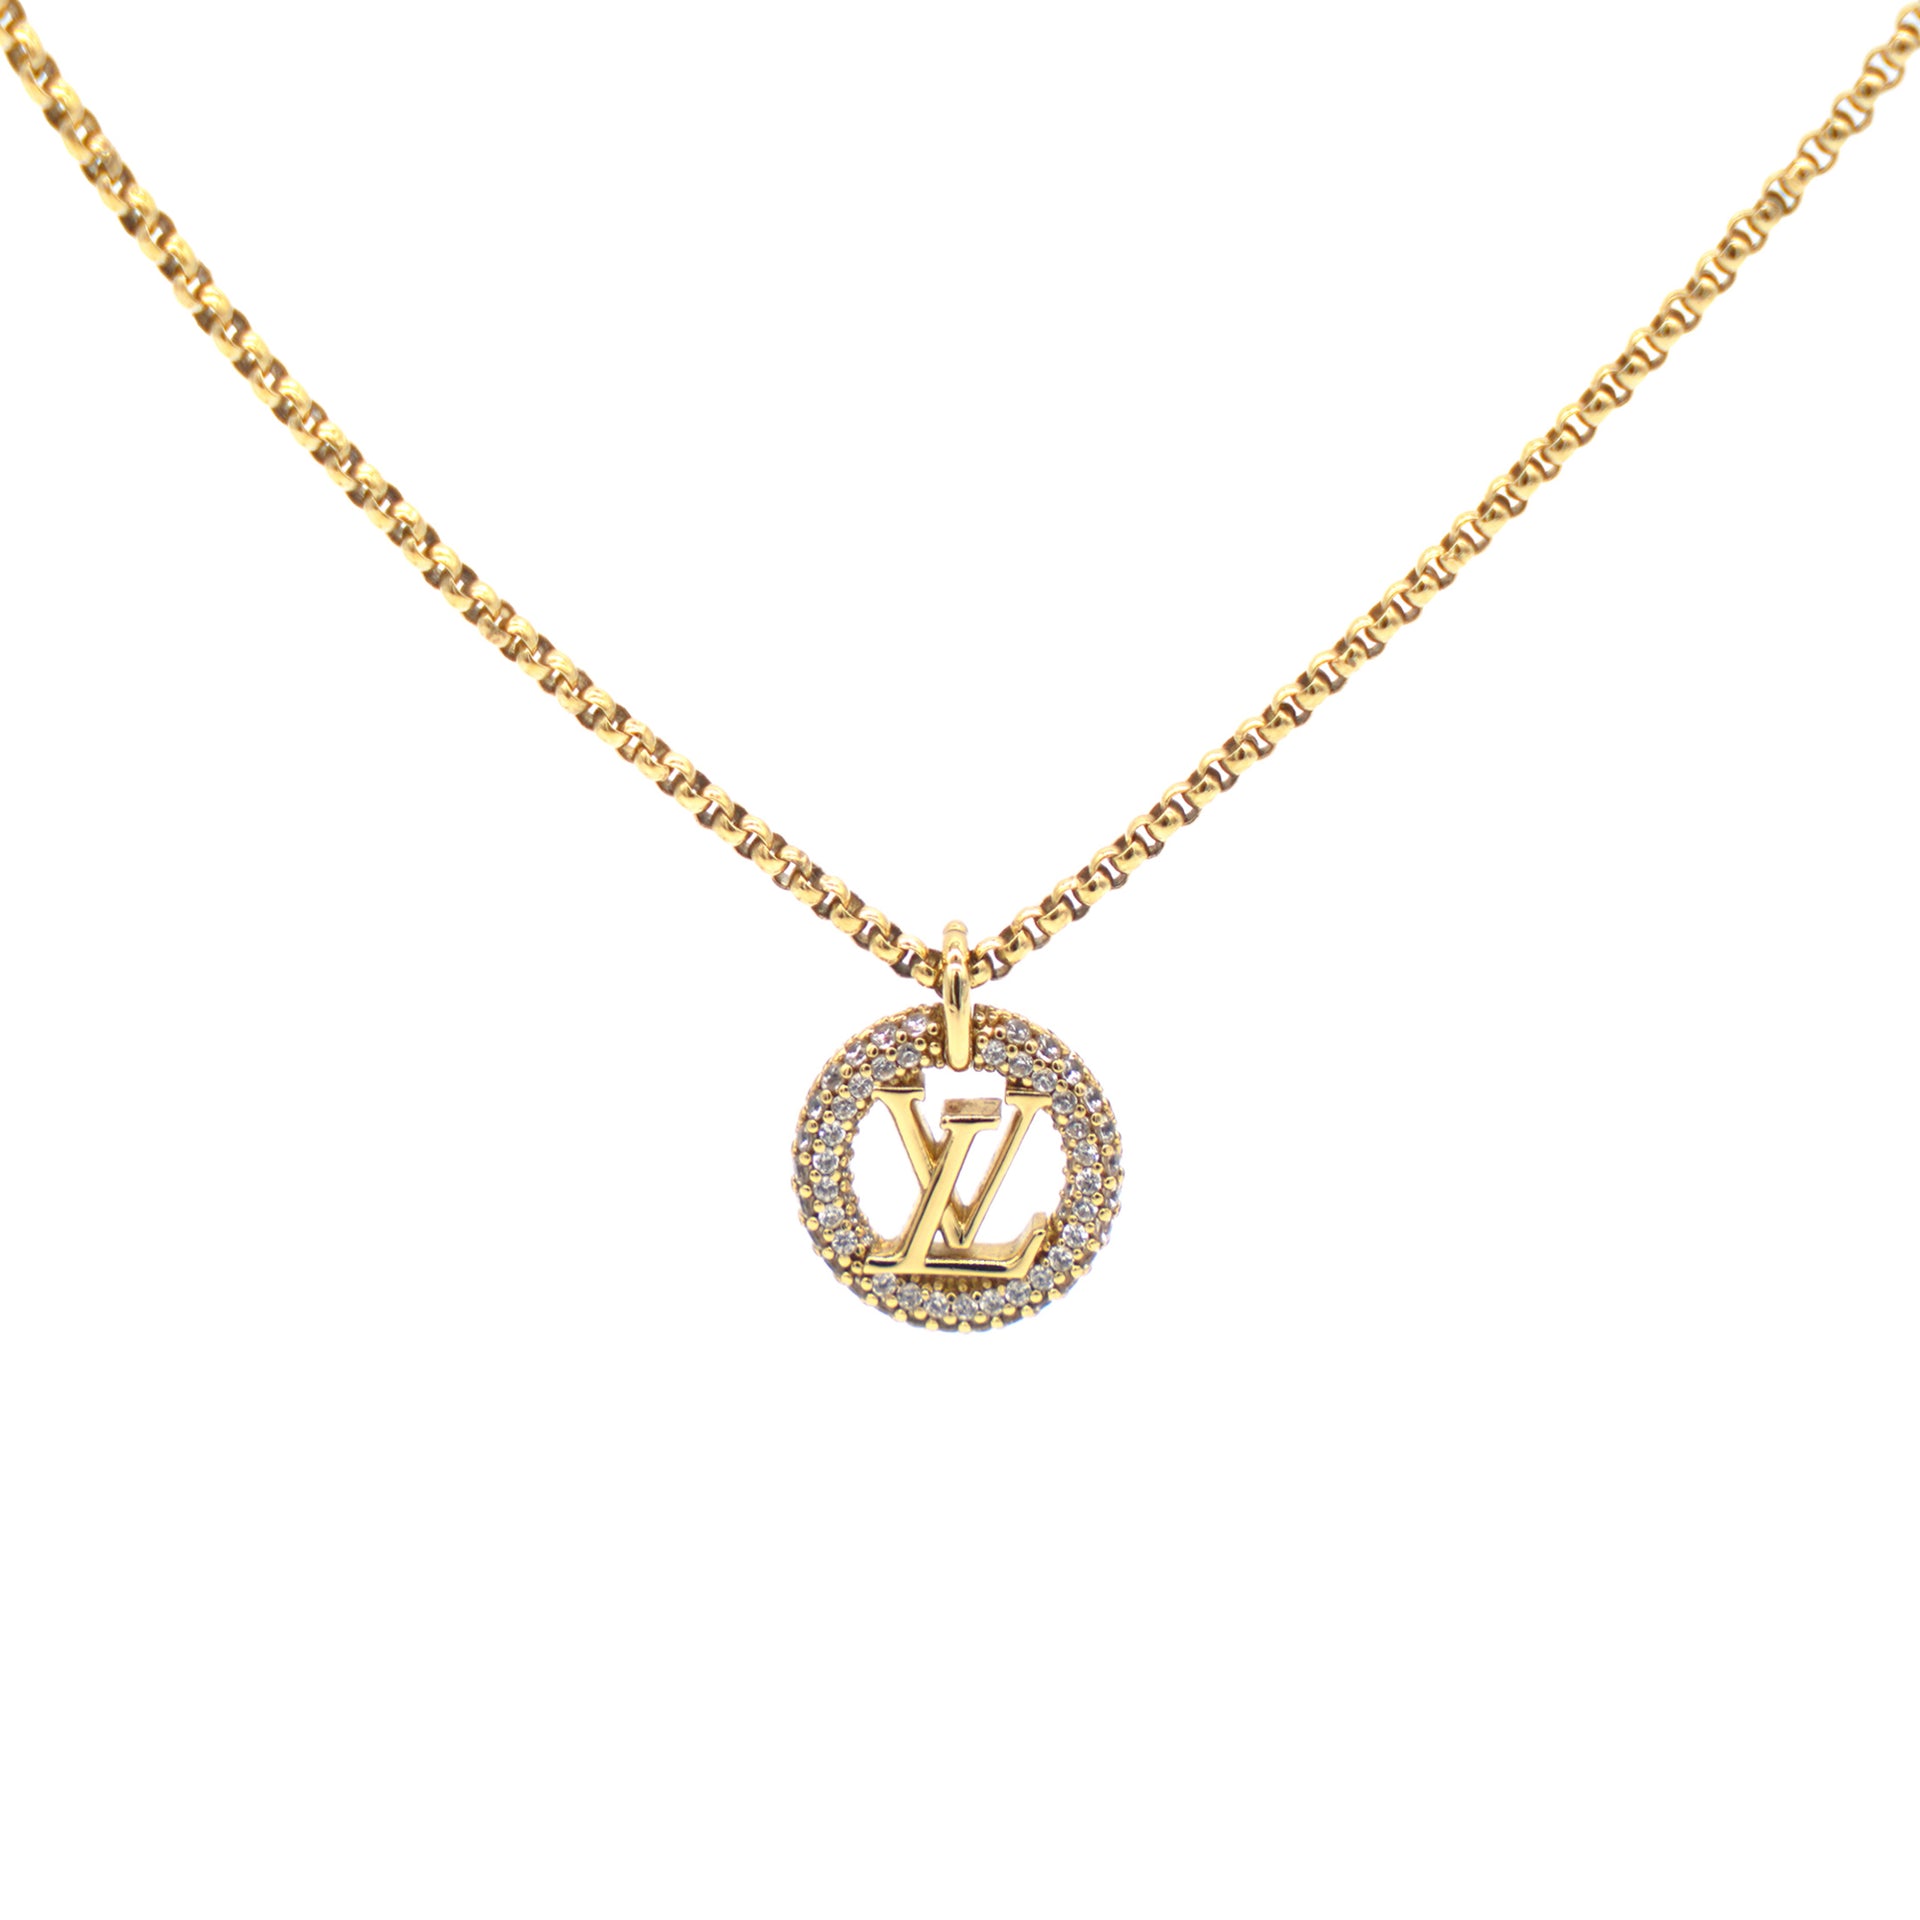 Louis Vuitton - Authenticated Monogram Necklace - Metal Gold for Women, Very Good Condition